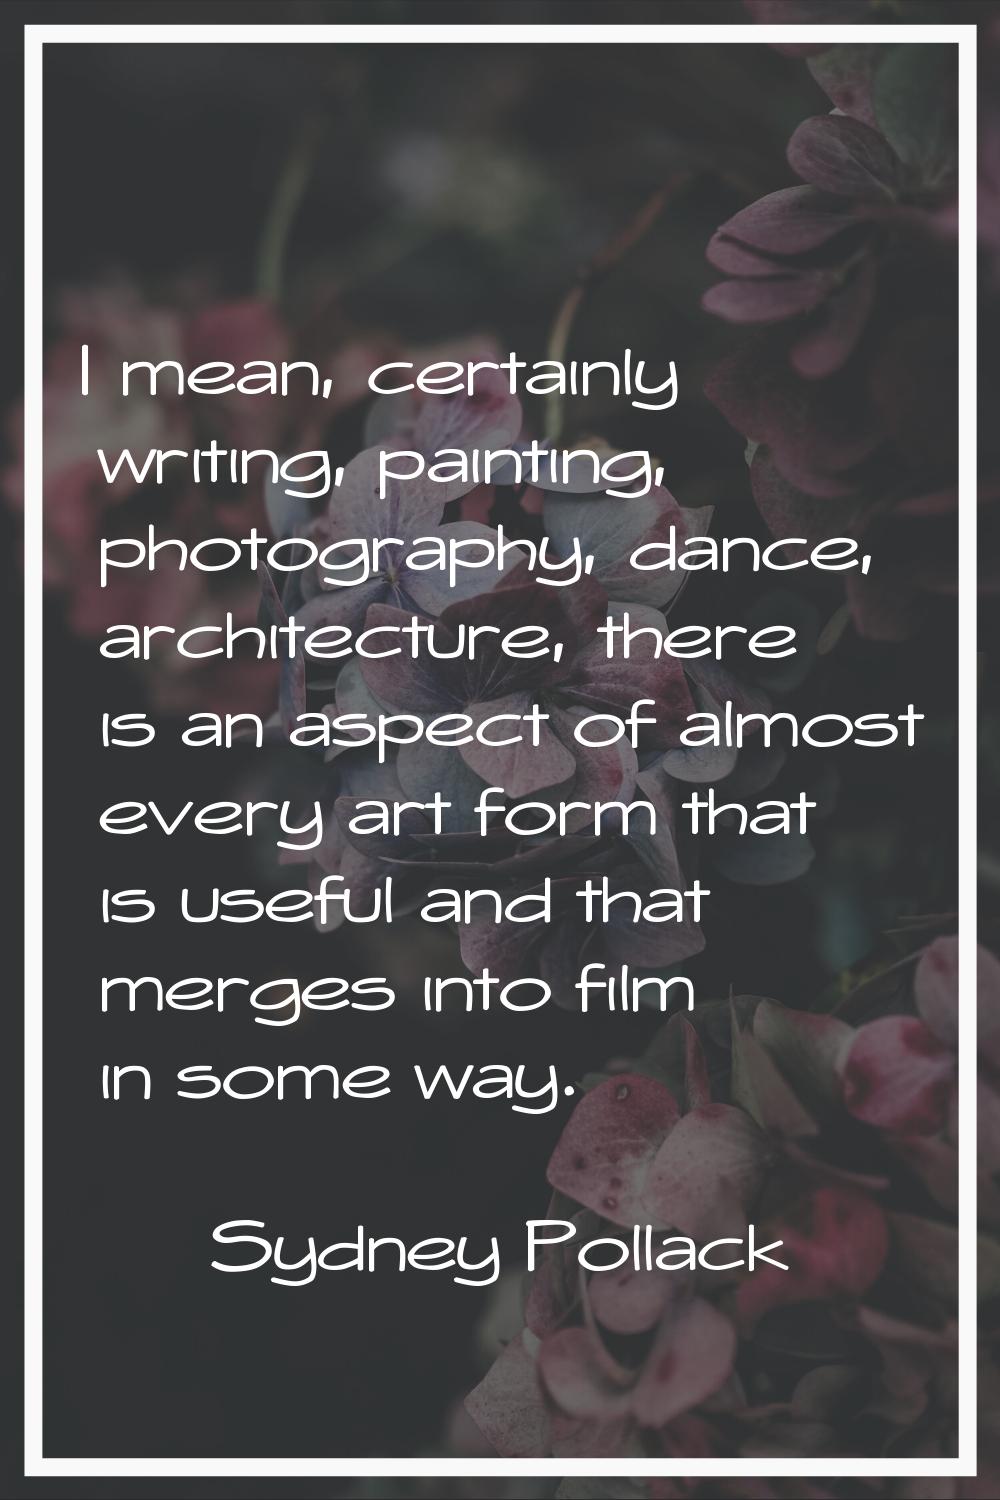 I mean, certainly writing, painting, photography, dance, architecture, there is an aspect of almost